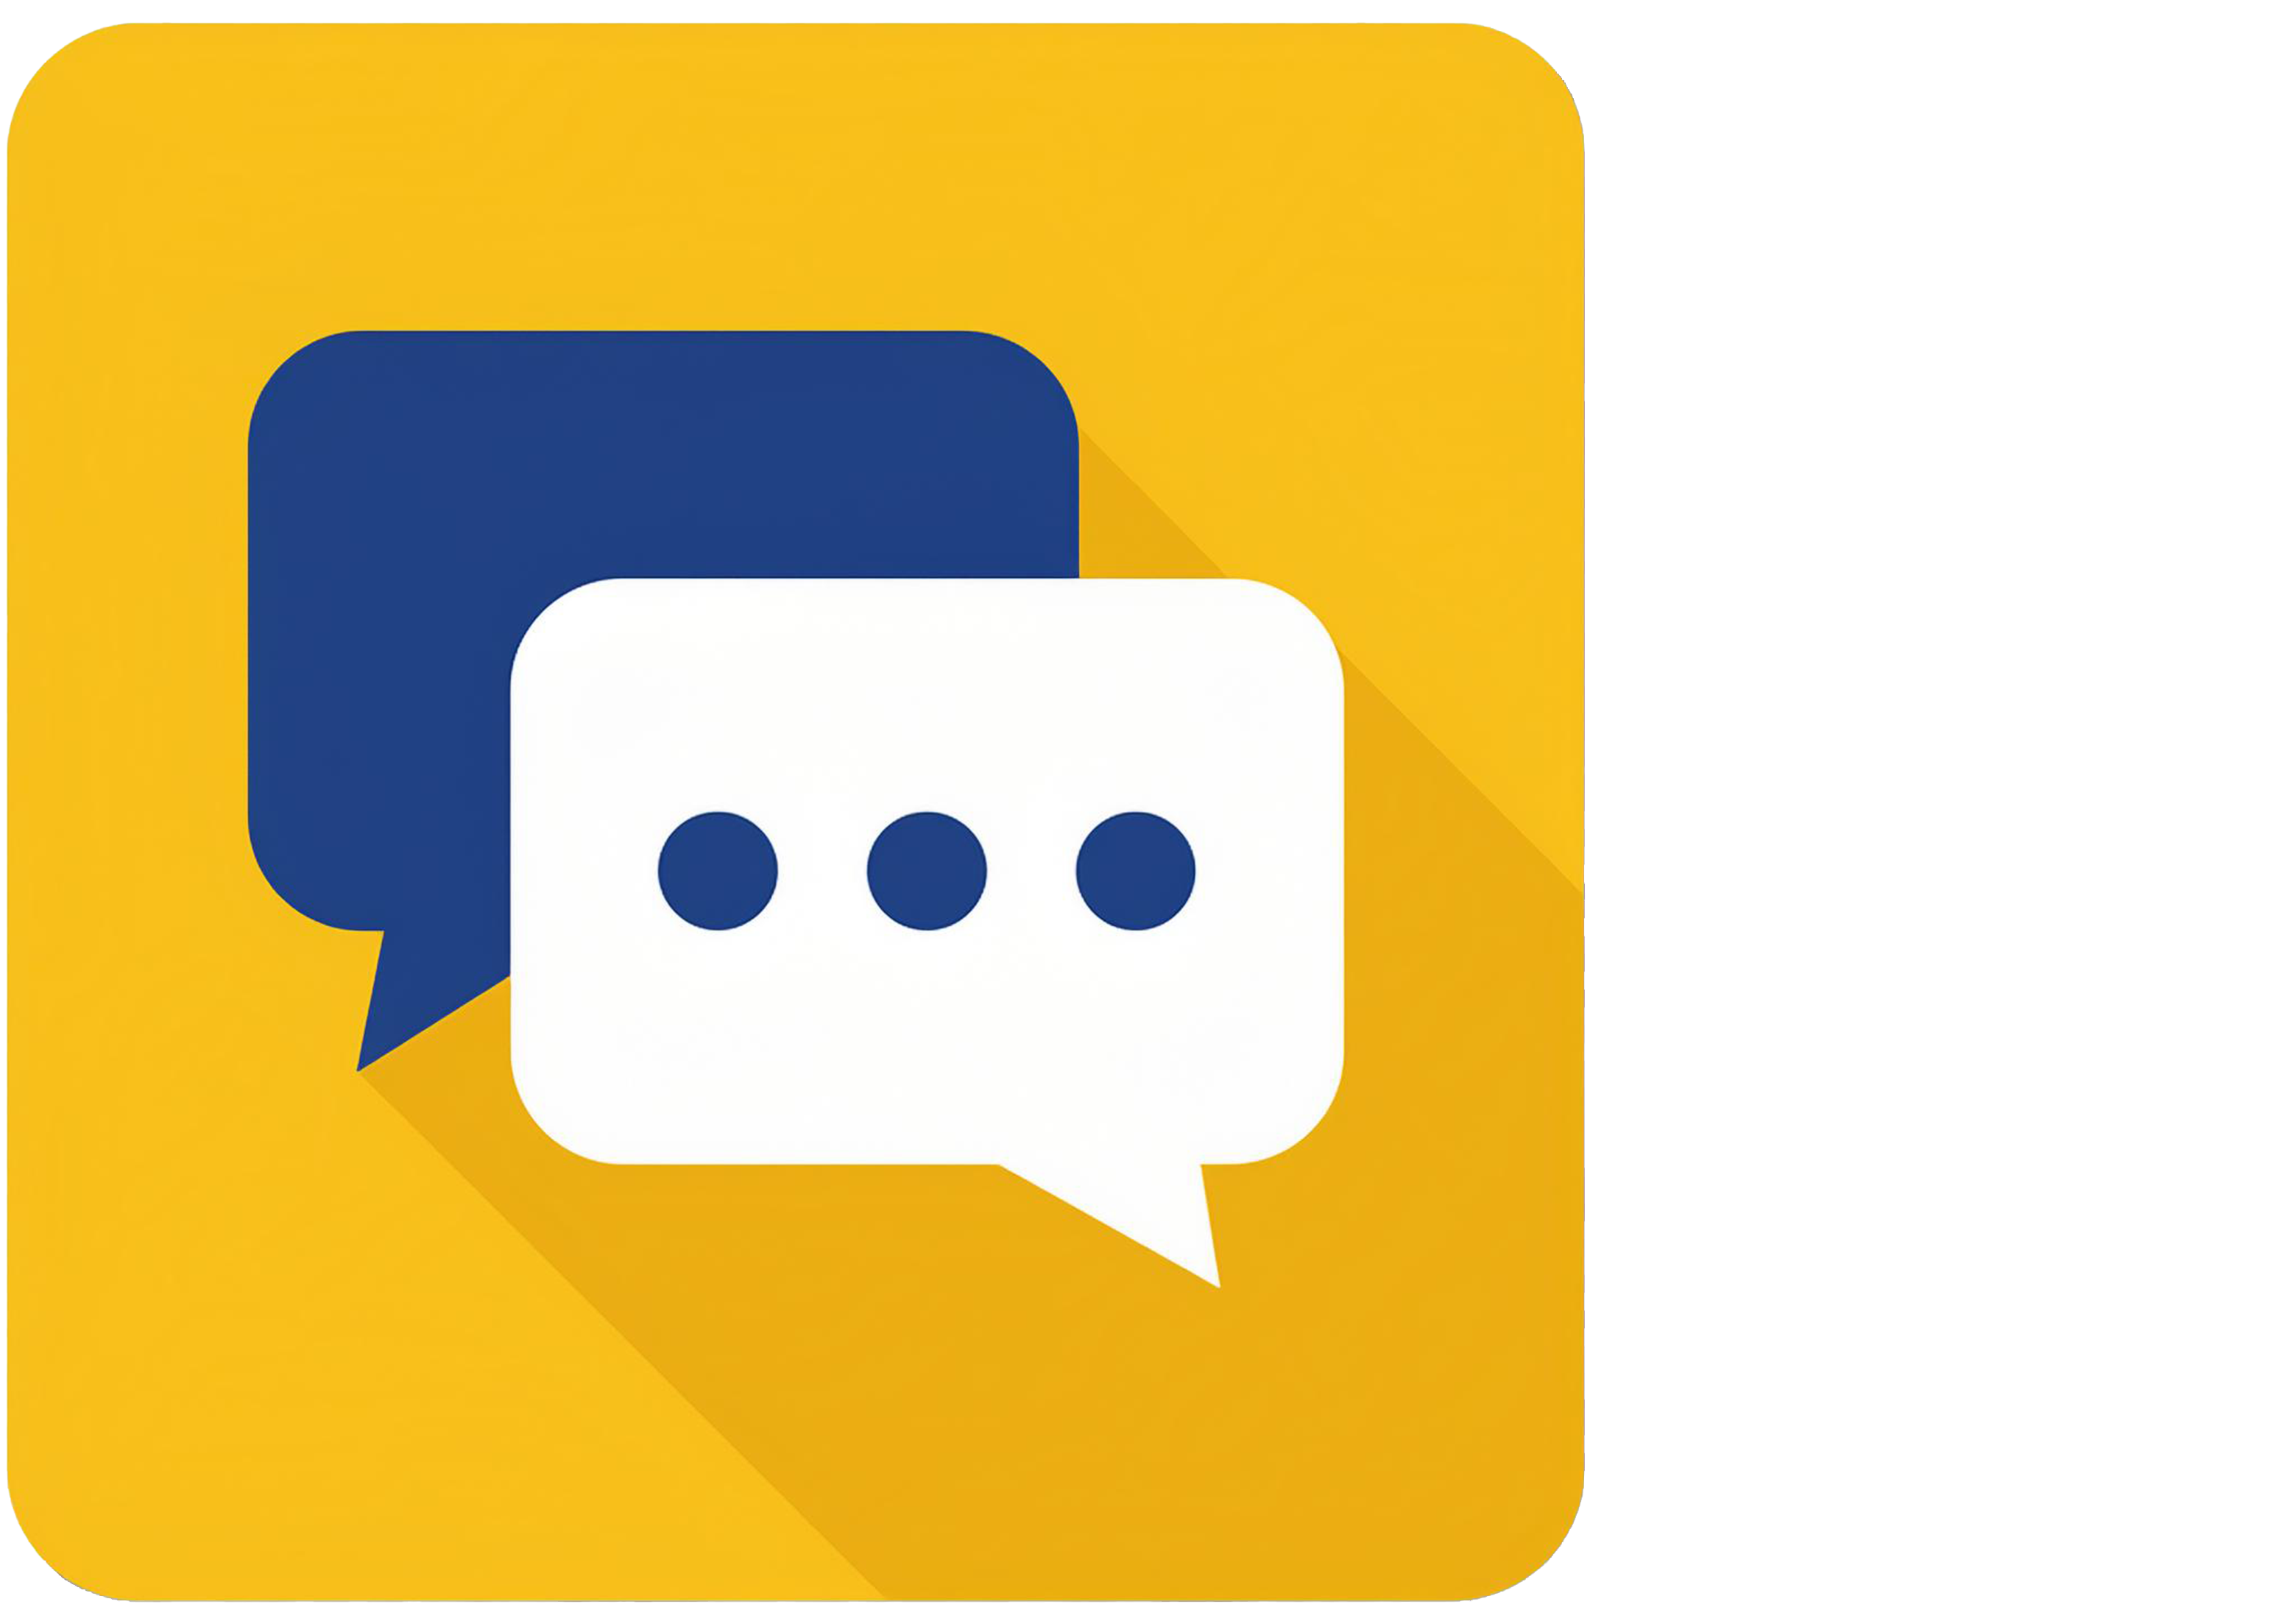 icon for generative ai chatbot that shows two speech bubbles